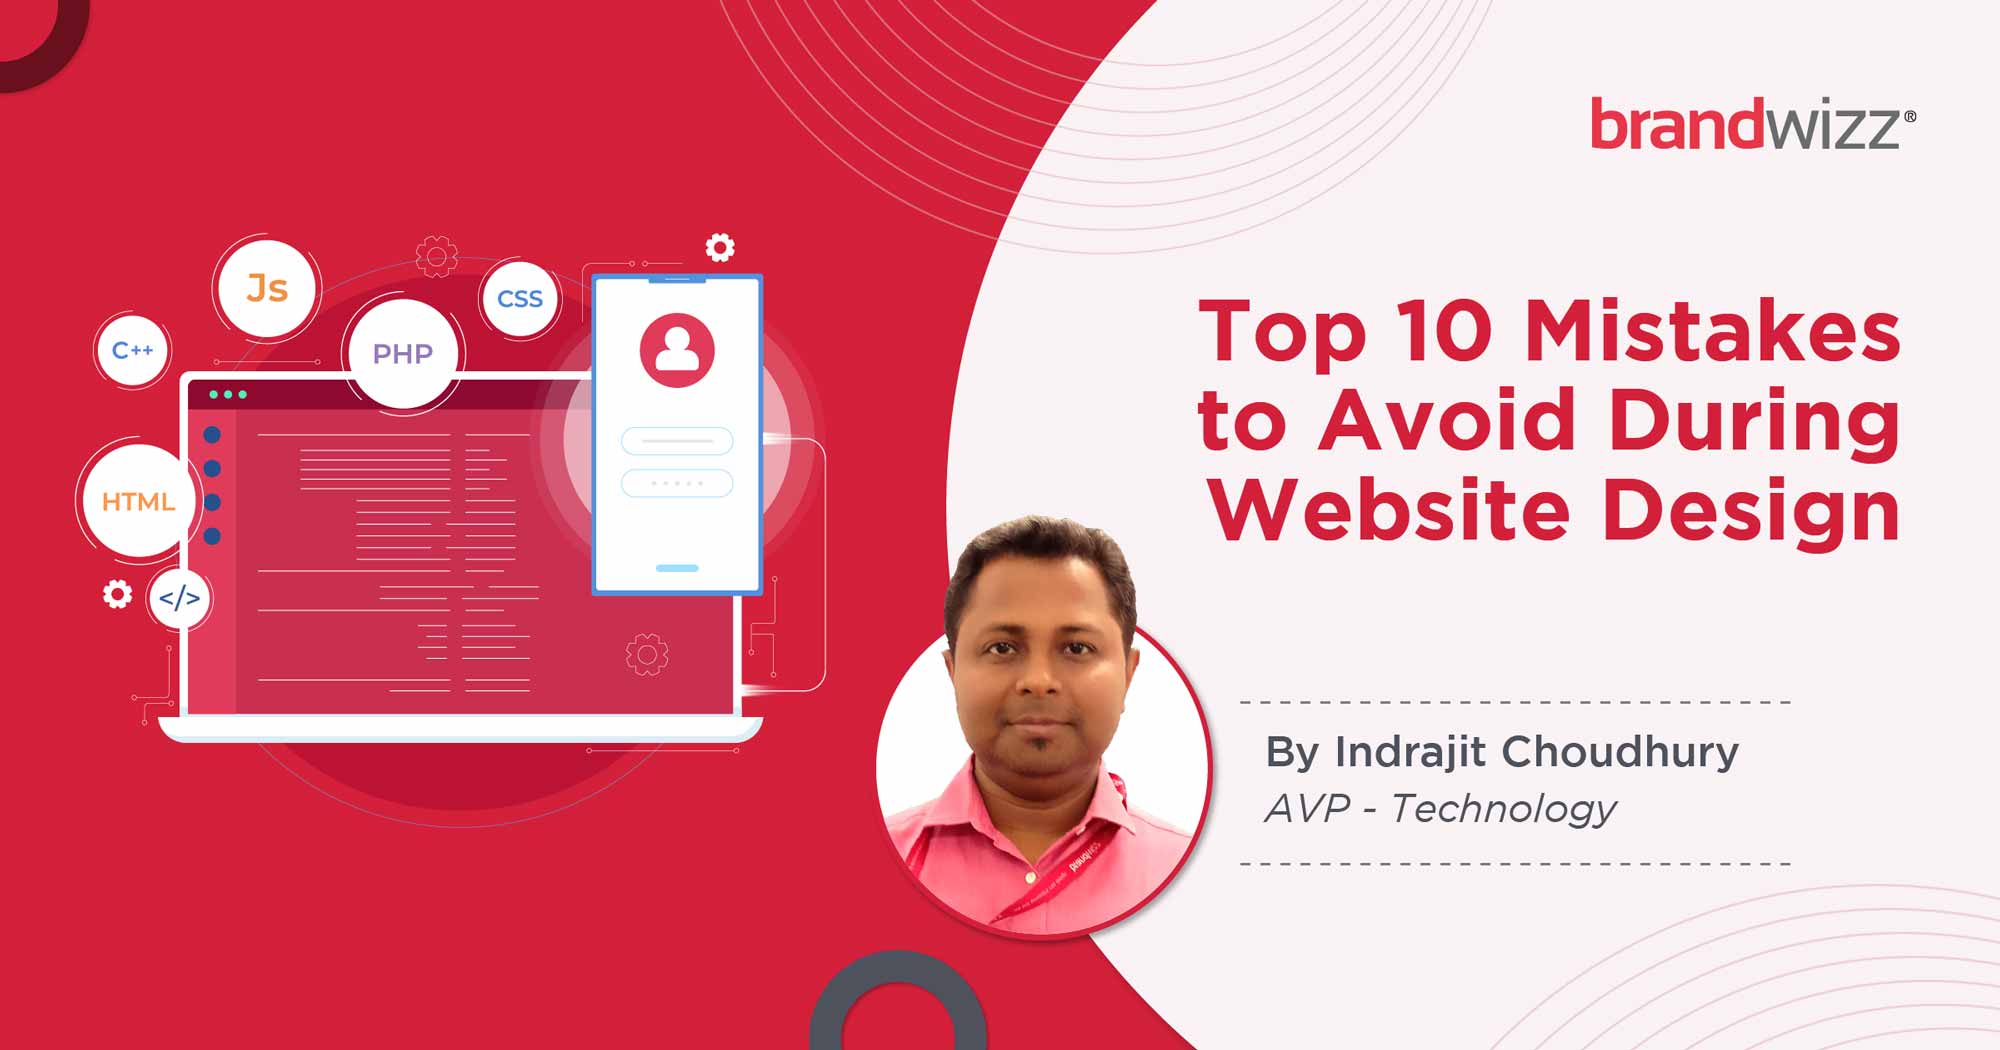 Top 10 Mistakes to Avoid During Website Design